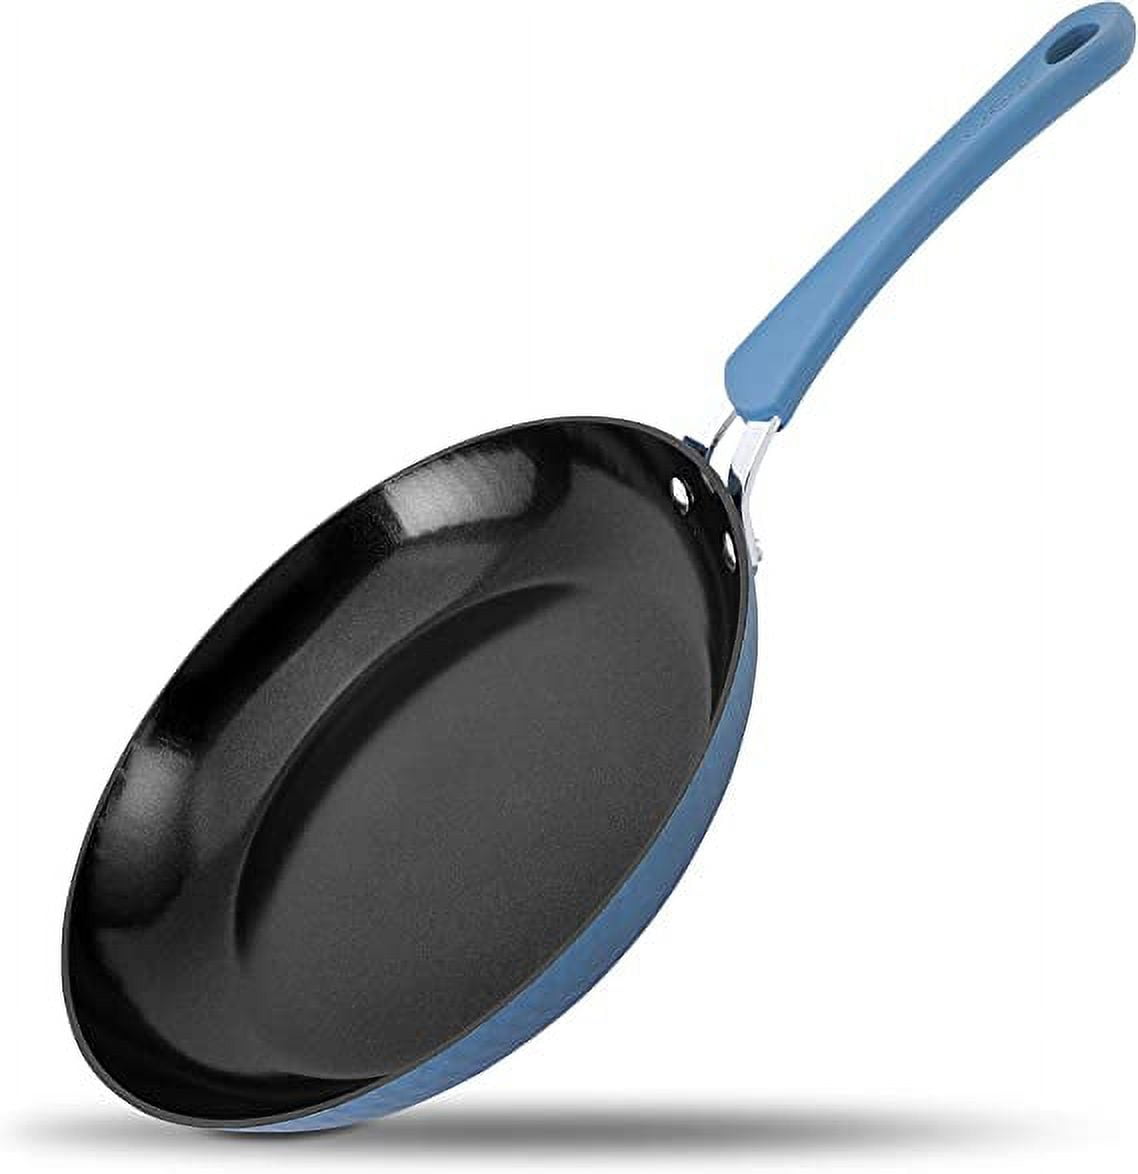 NutriChef 8 Small Skillet Nonstick Frying Pan W/ Lid, Blue Silicone  Handle, Ceramic Coating